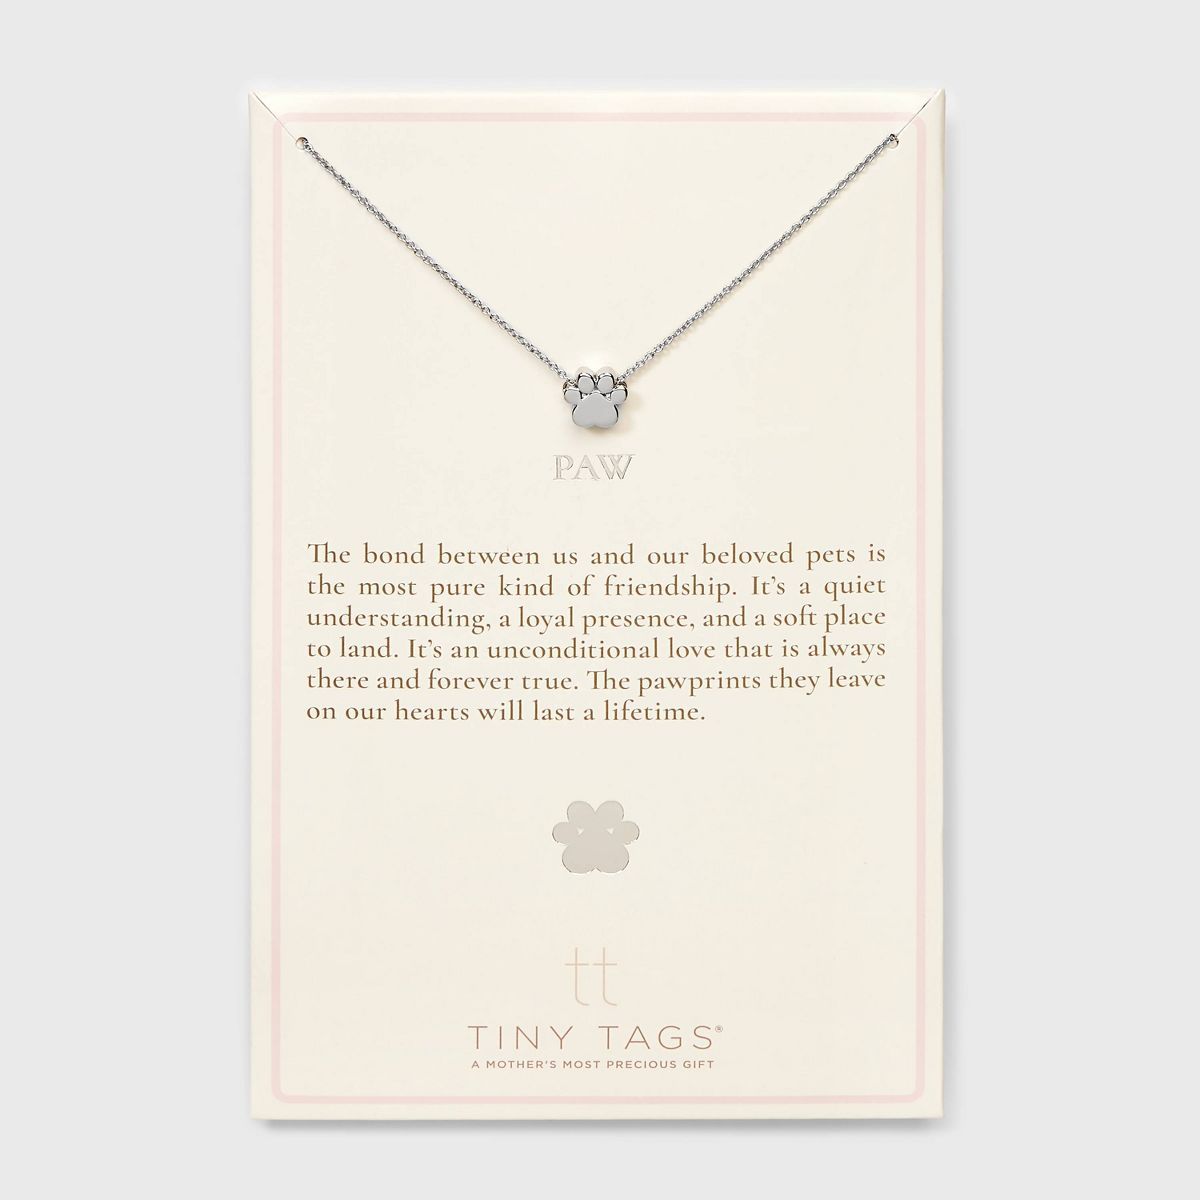 Tiny Tags Silver Plated Paw Chain Necklace - Silver | Target